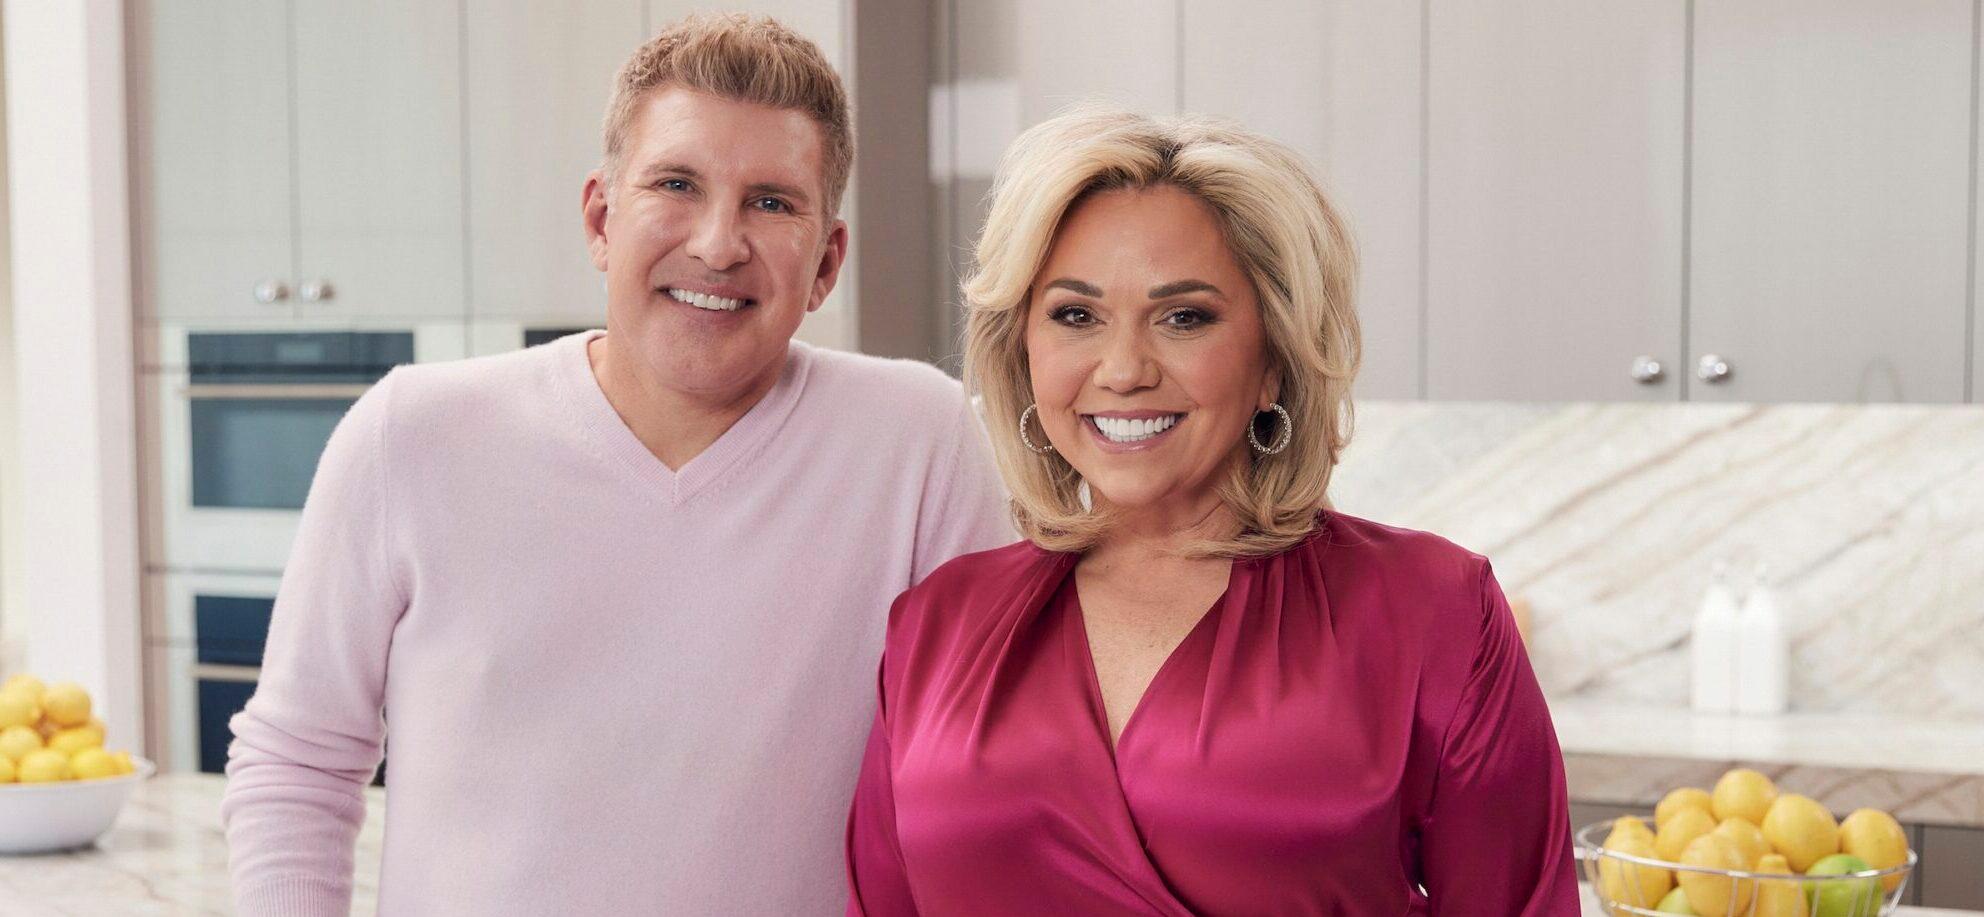 Todd and Julie Chrisley show off their collective 40lbs weight loss in new Nutrisystem photoshoot